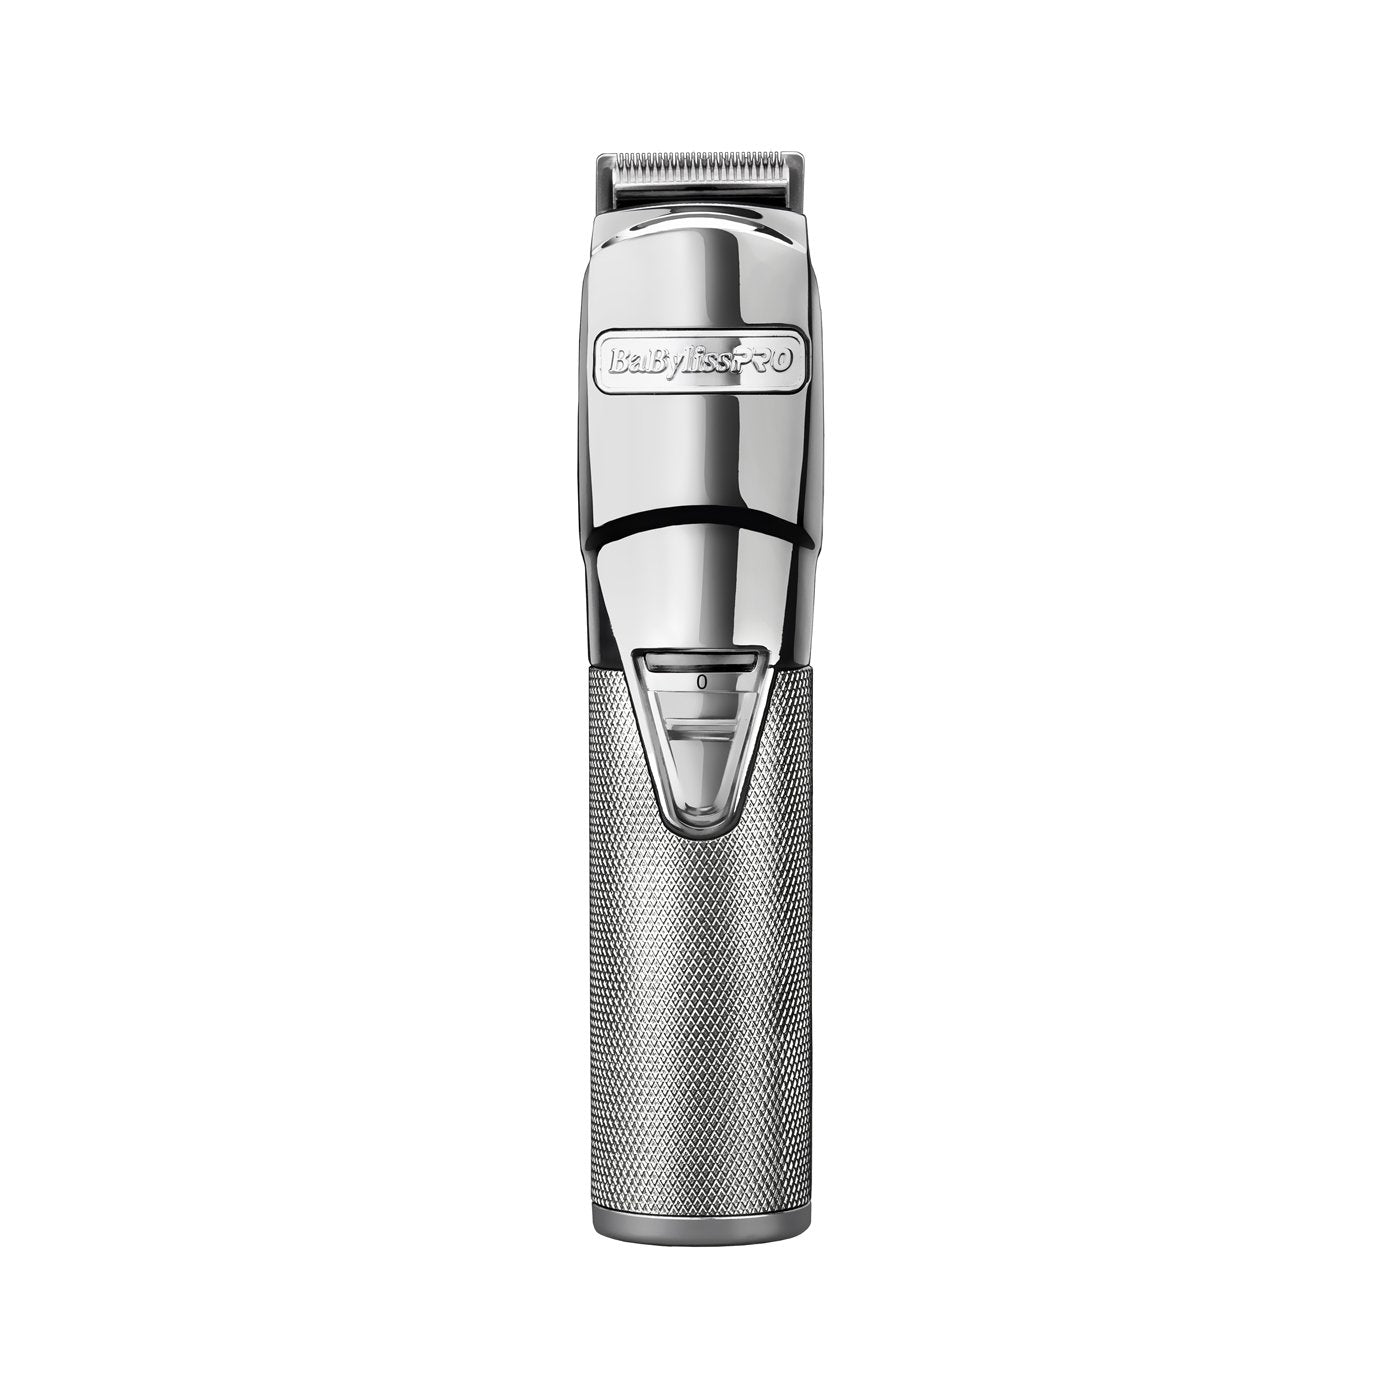 Babyliss Super Motor Trimmer - Ultimate Hair and Beauty